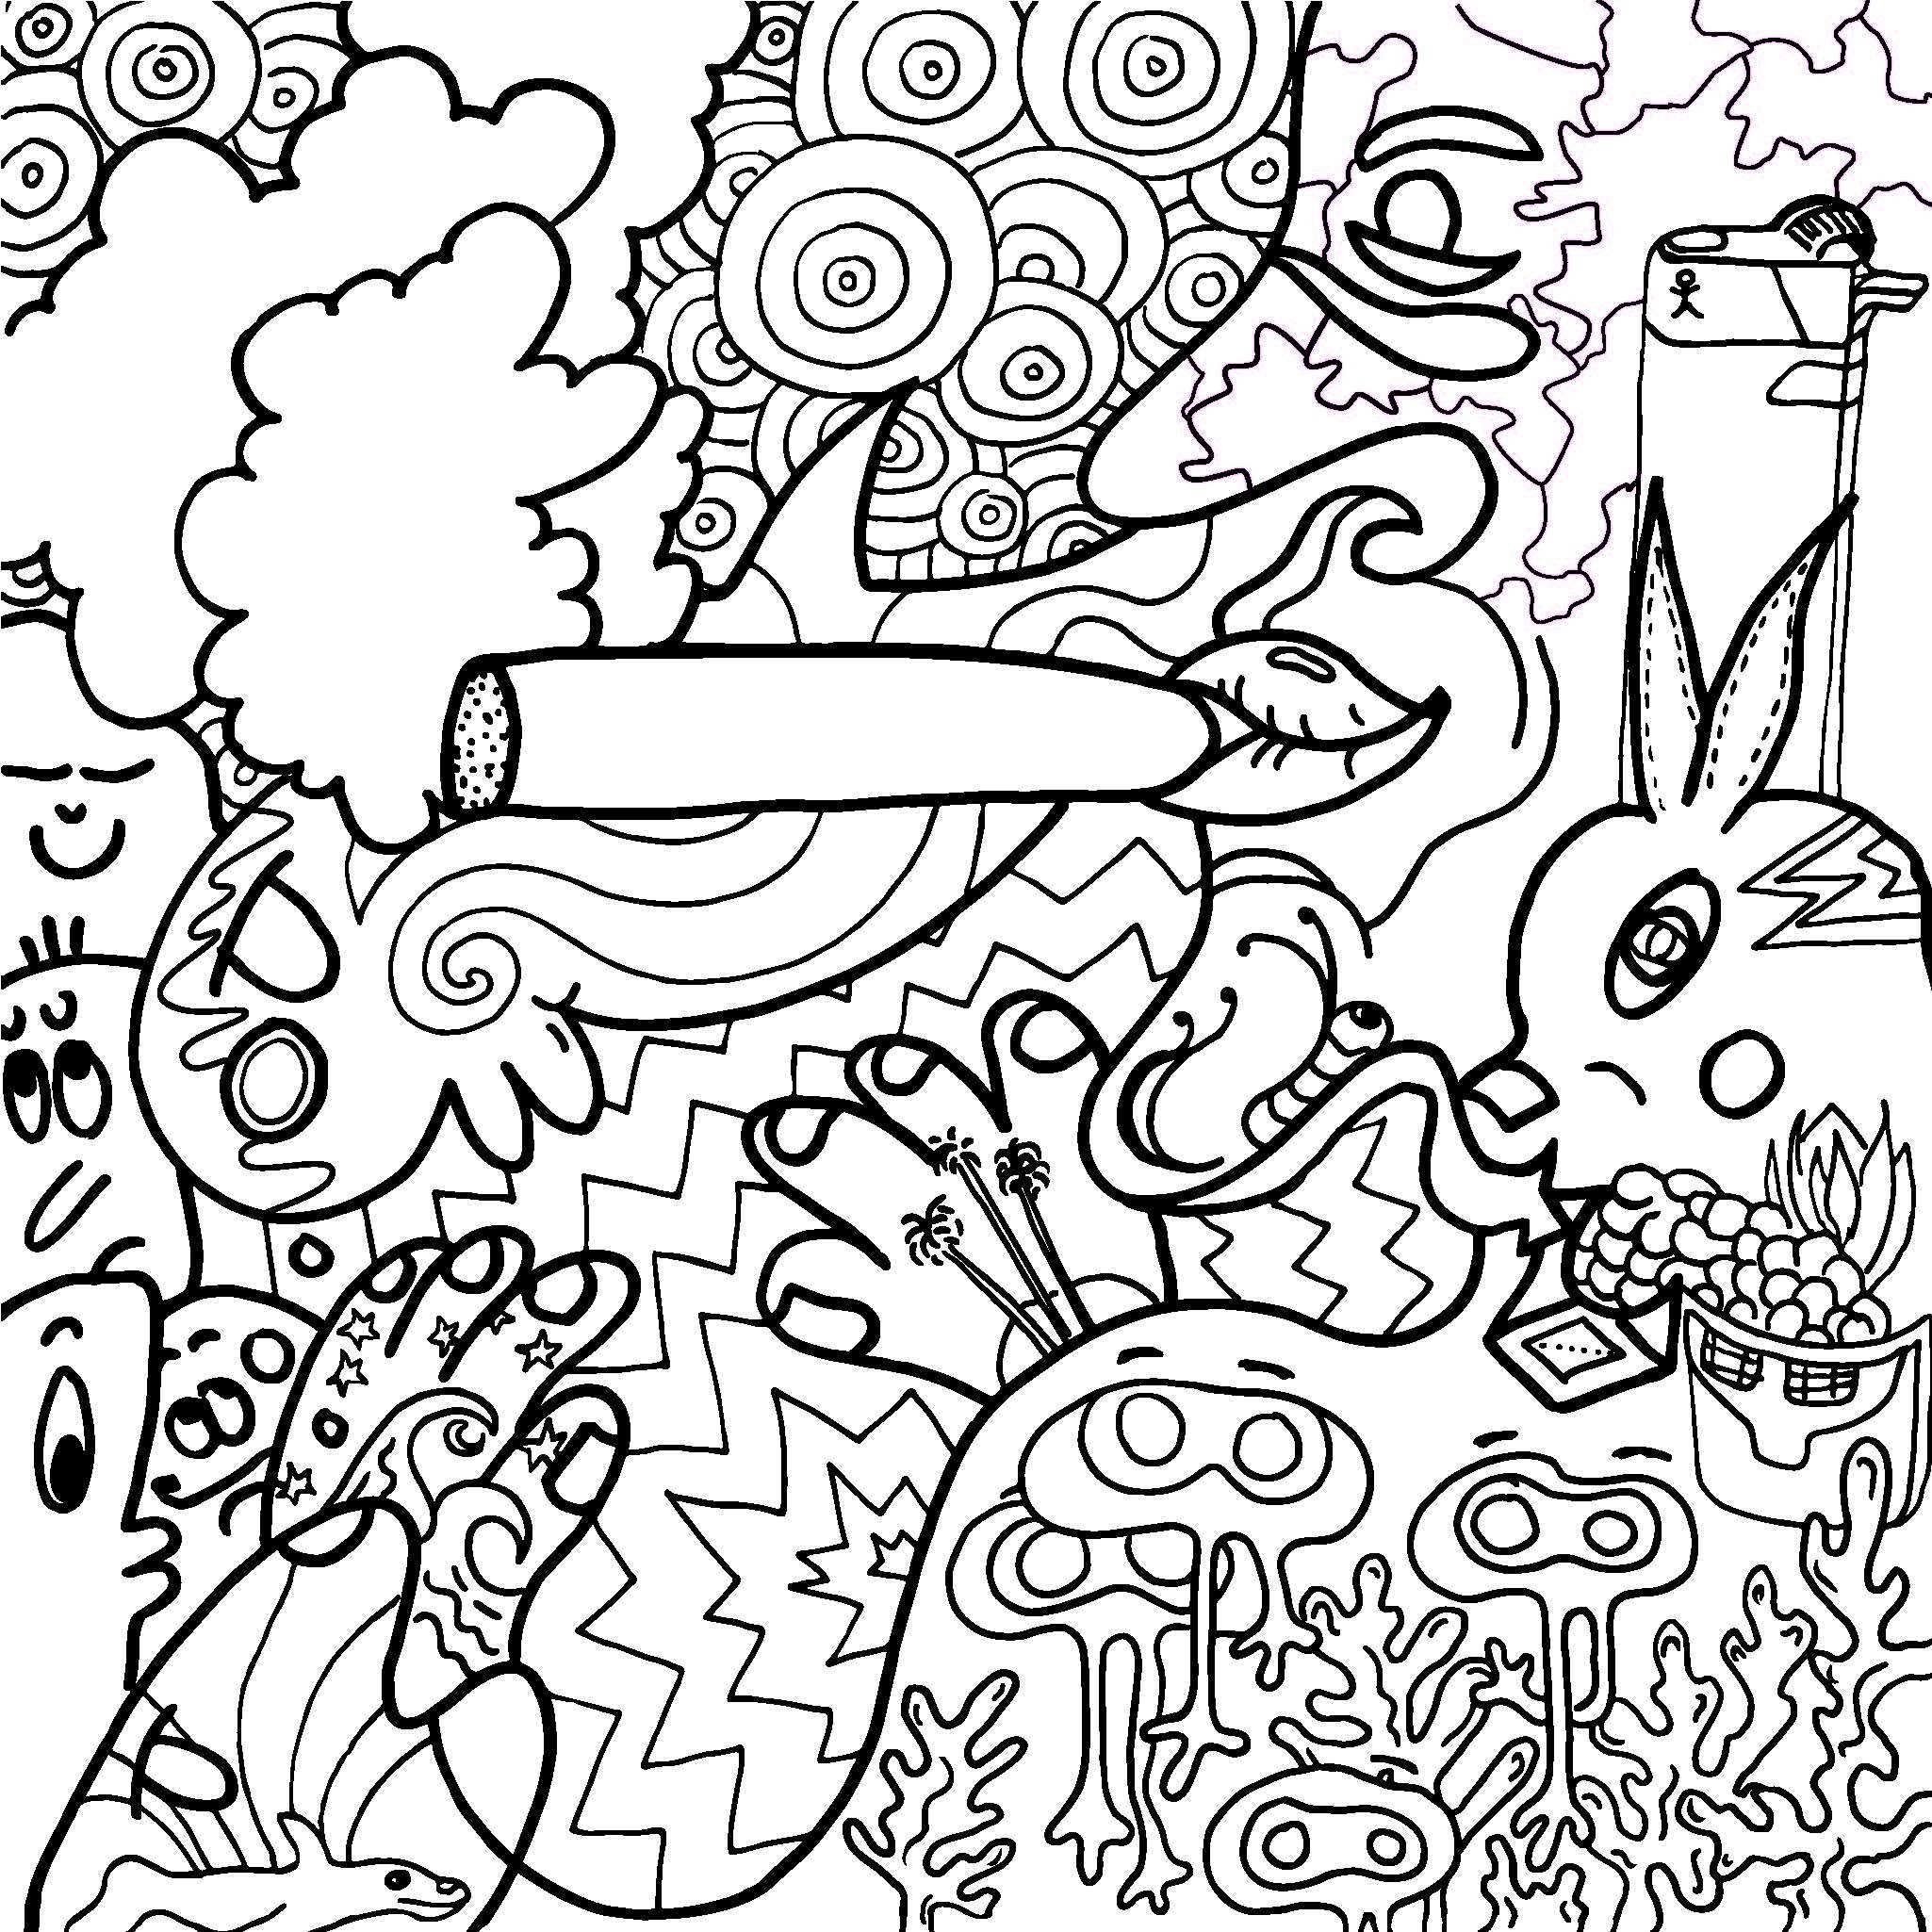 Stoner Coloring Book for Adults: the king of weed Let's Get High And Color,  The Stoner's Psychedelic Coloring Book, cannabis coloring books for adults  a book by Aymen Boudefar